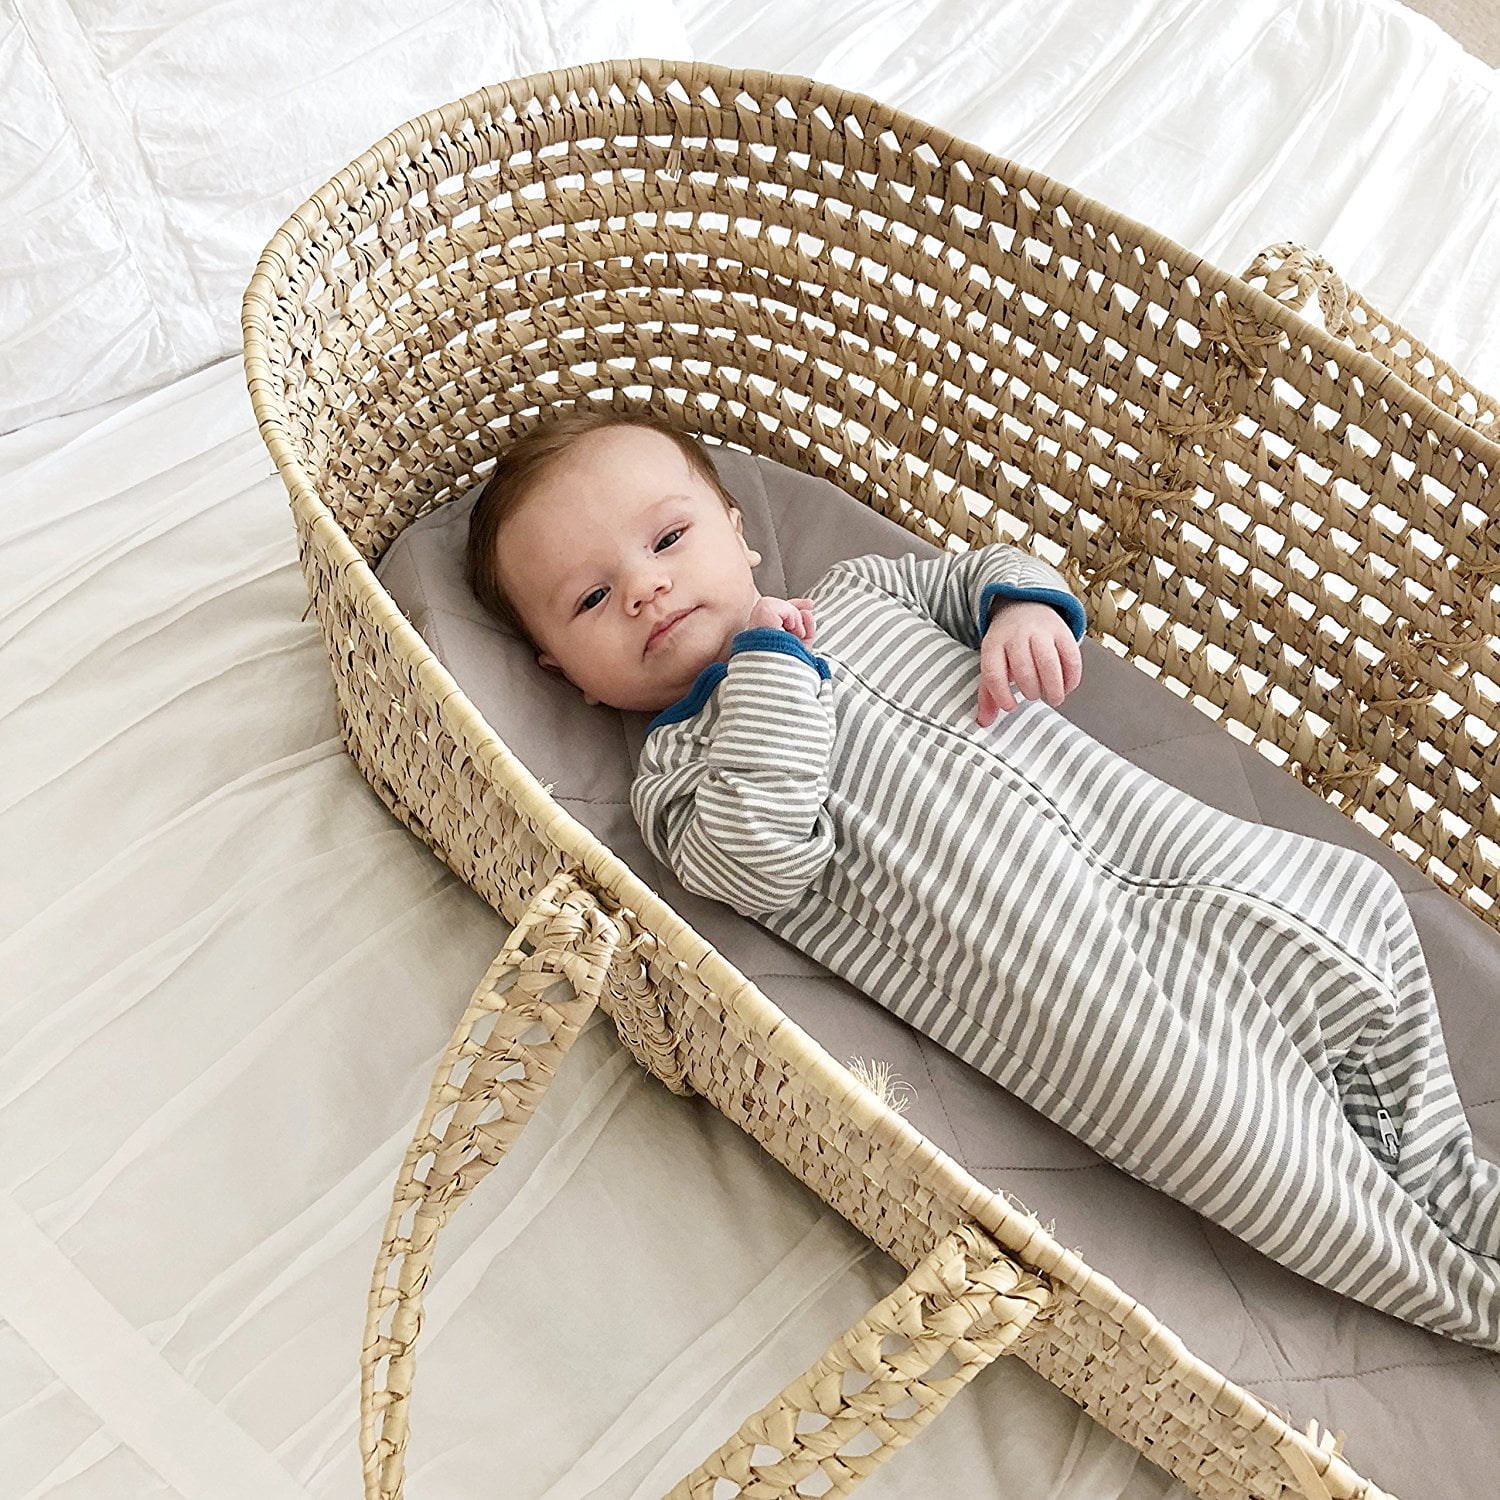 Aspen Gold Hourglass Bassinet Mattress Pad Silky Soft Minky Bassinet Mattress Protector for Babies Infants Boys Girls 33 x 17 x 2 inches Minky Dots Bassinet Cover to Fit Oval 